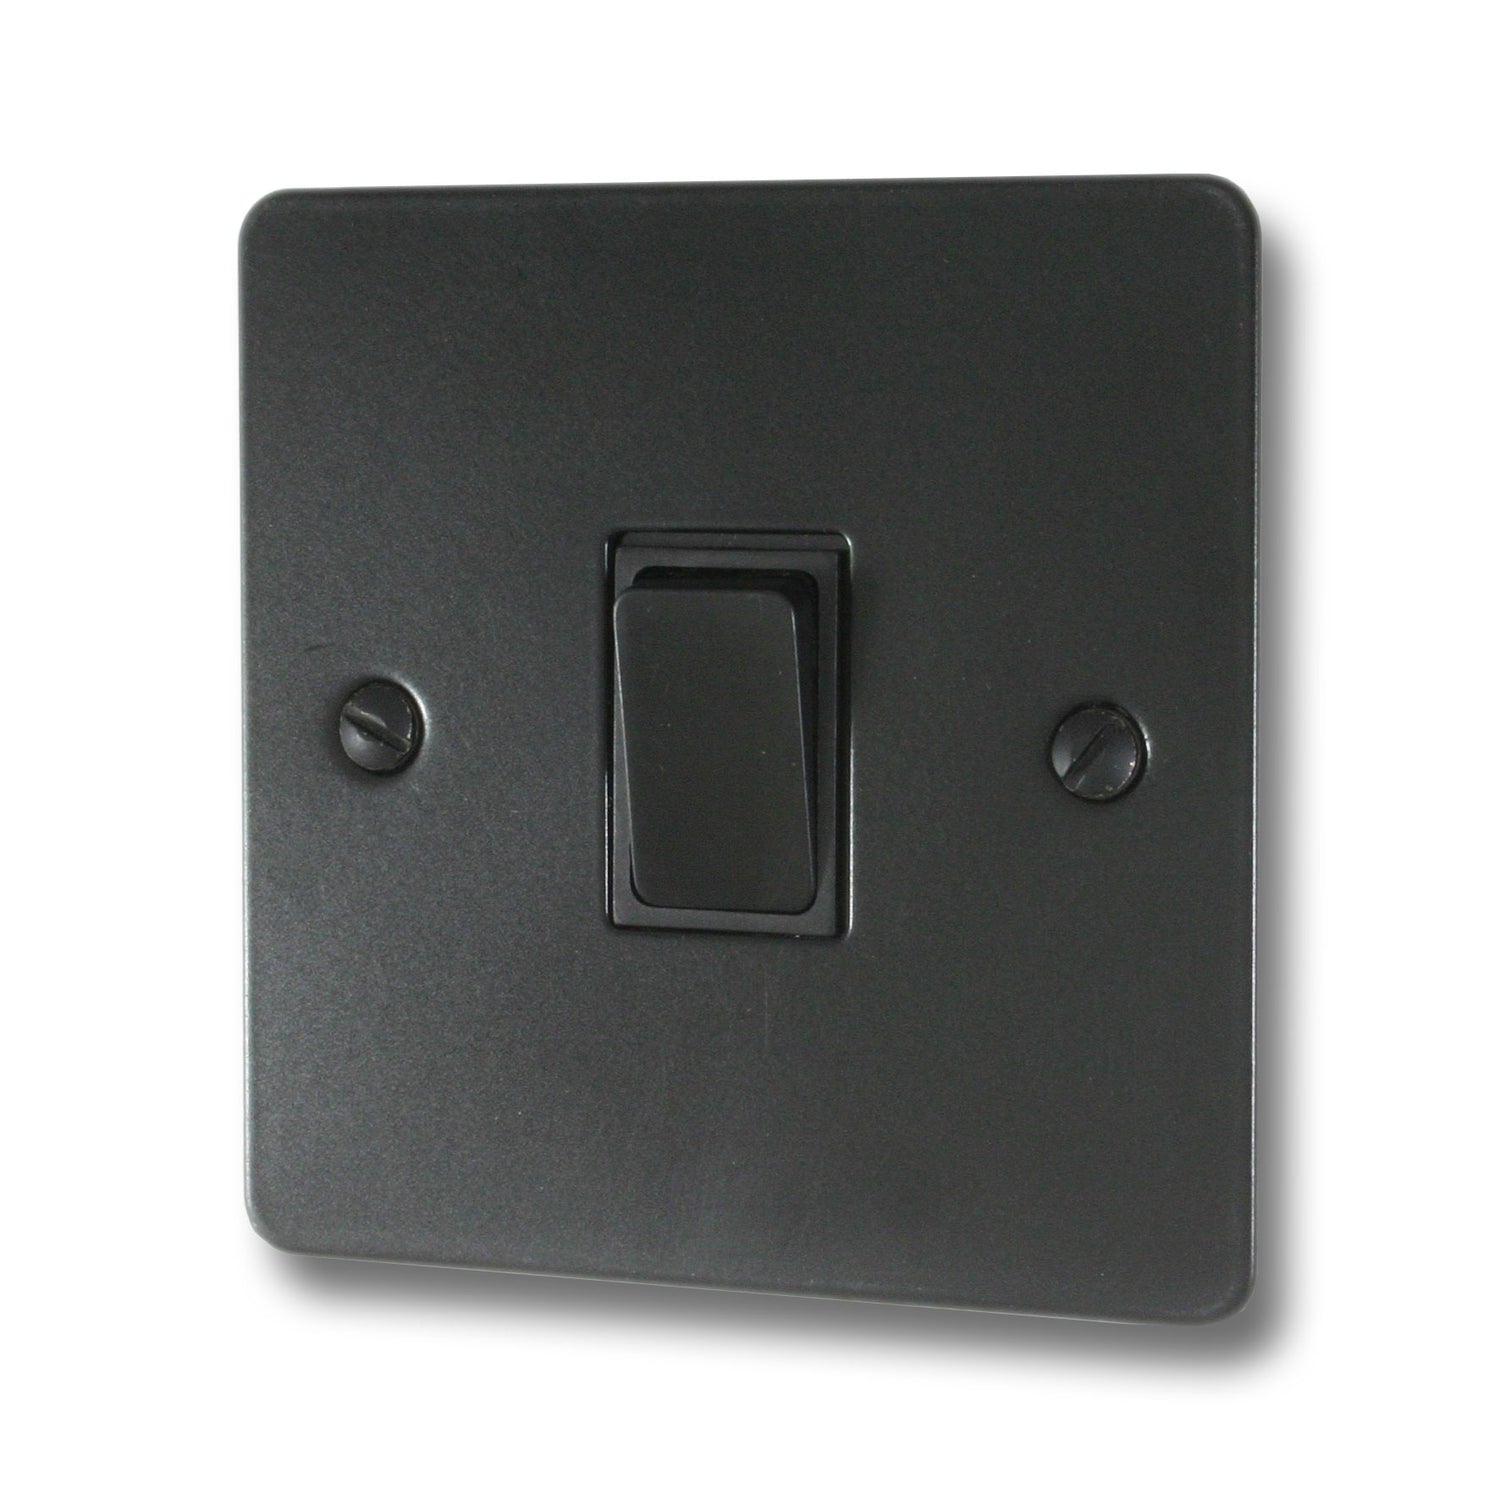 Flat Black Sockets and Switches